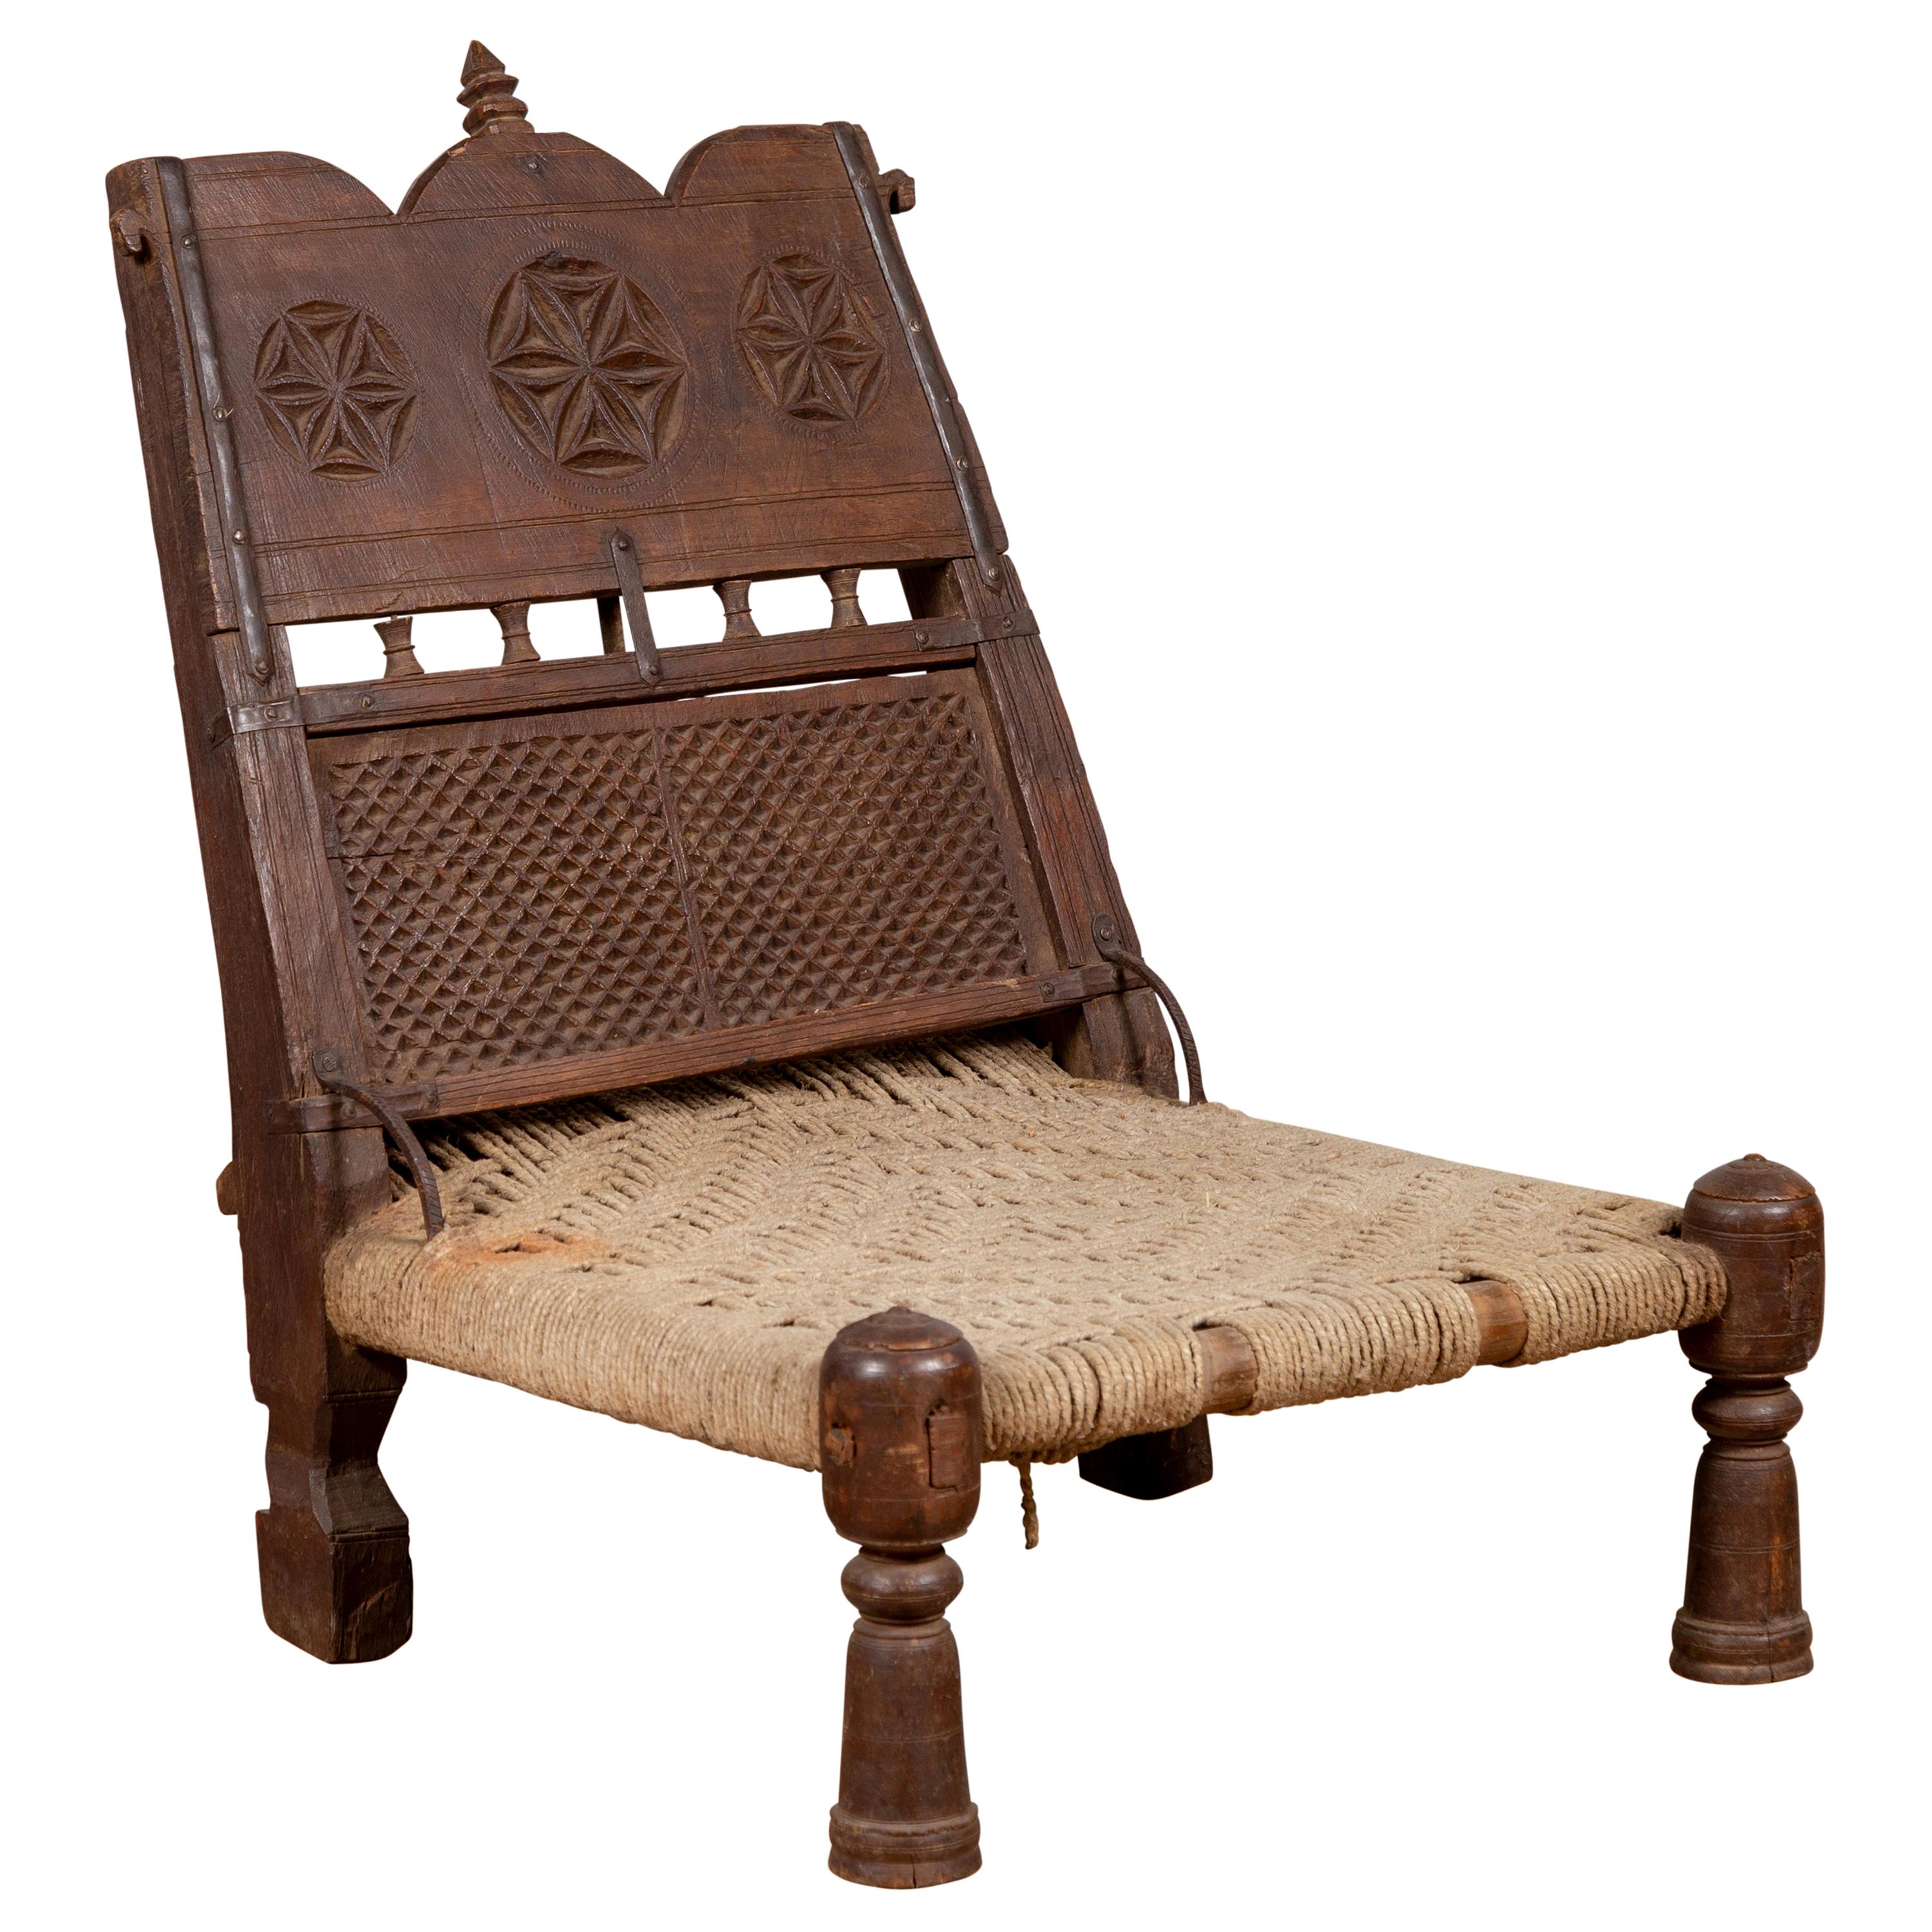 Antique Indian Rustic Low Seat Wooden Chair with Carved Rosettes and Twine Seat